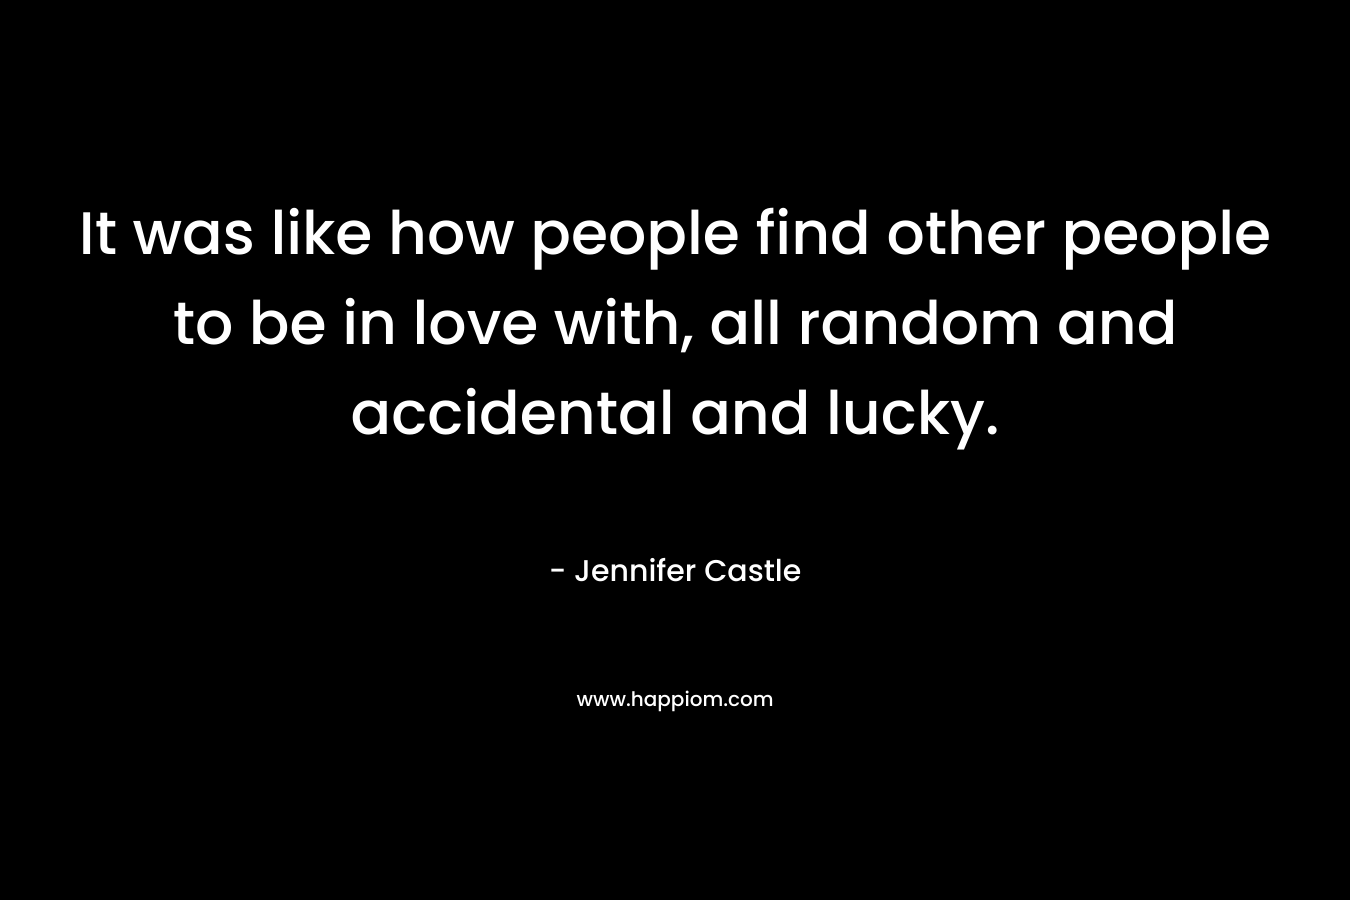 It was like how people find other people to be in love with, all random and accidental and lucky.